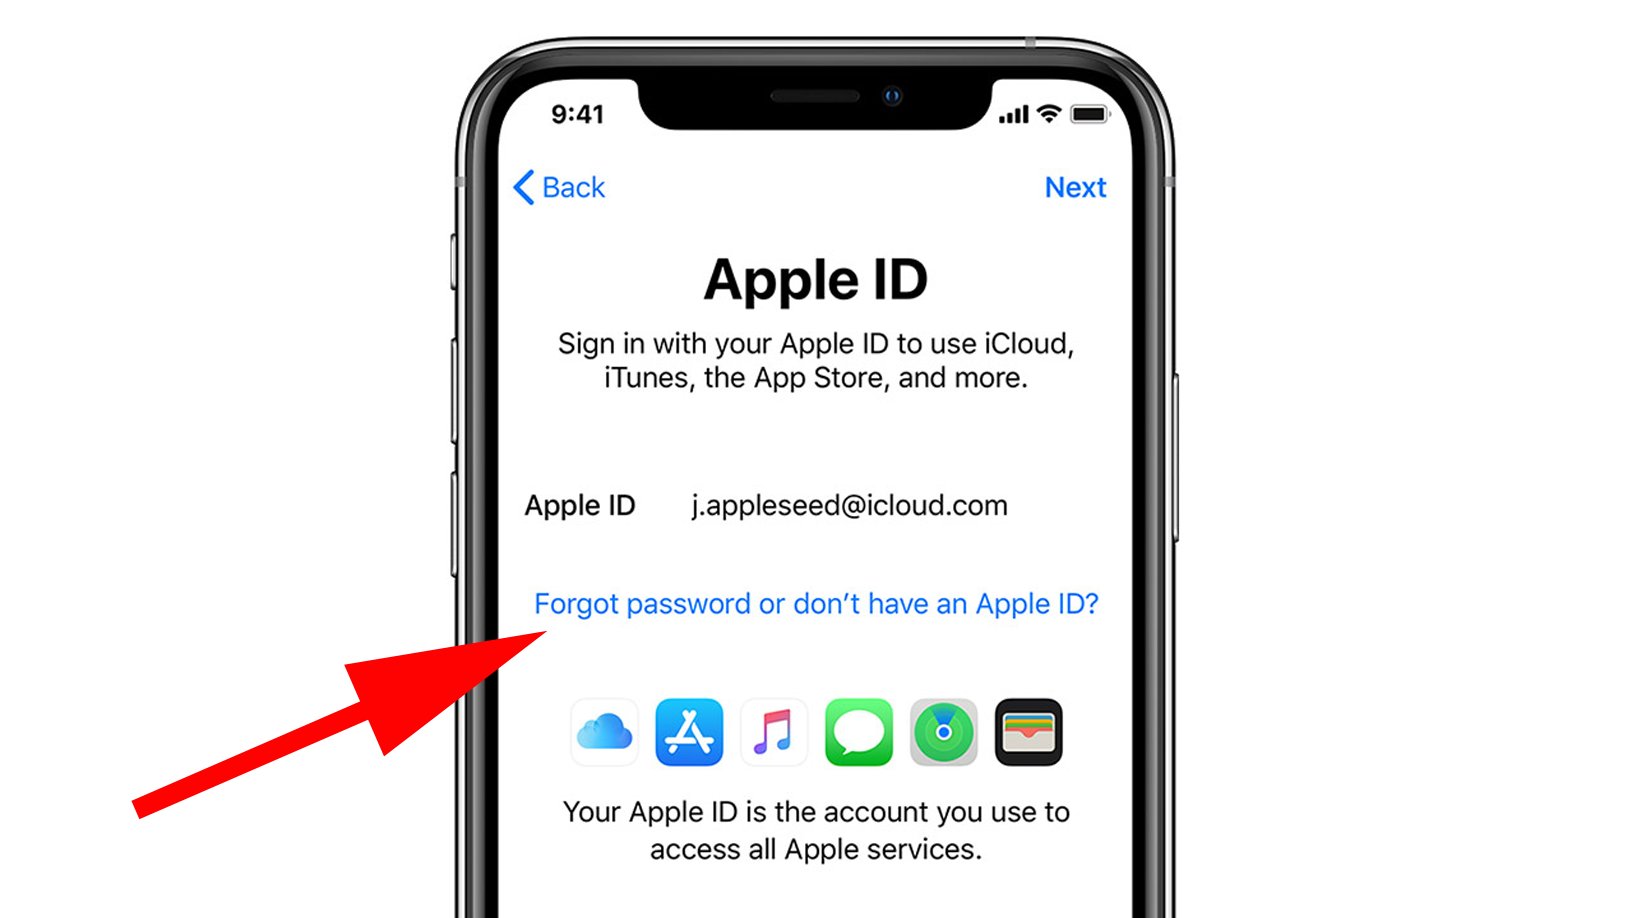 What Is An Apple ID? Is It Different From ITunes And ICloud?